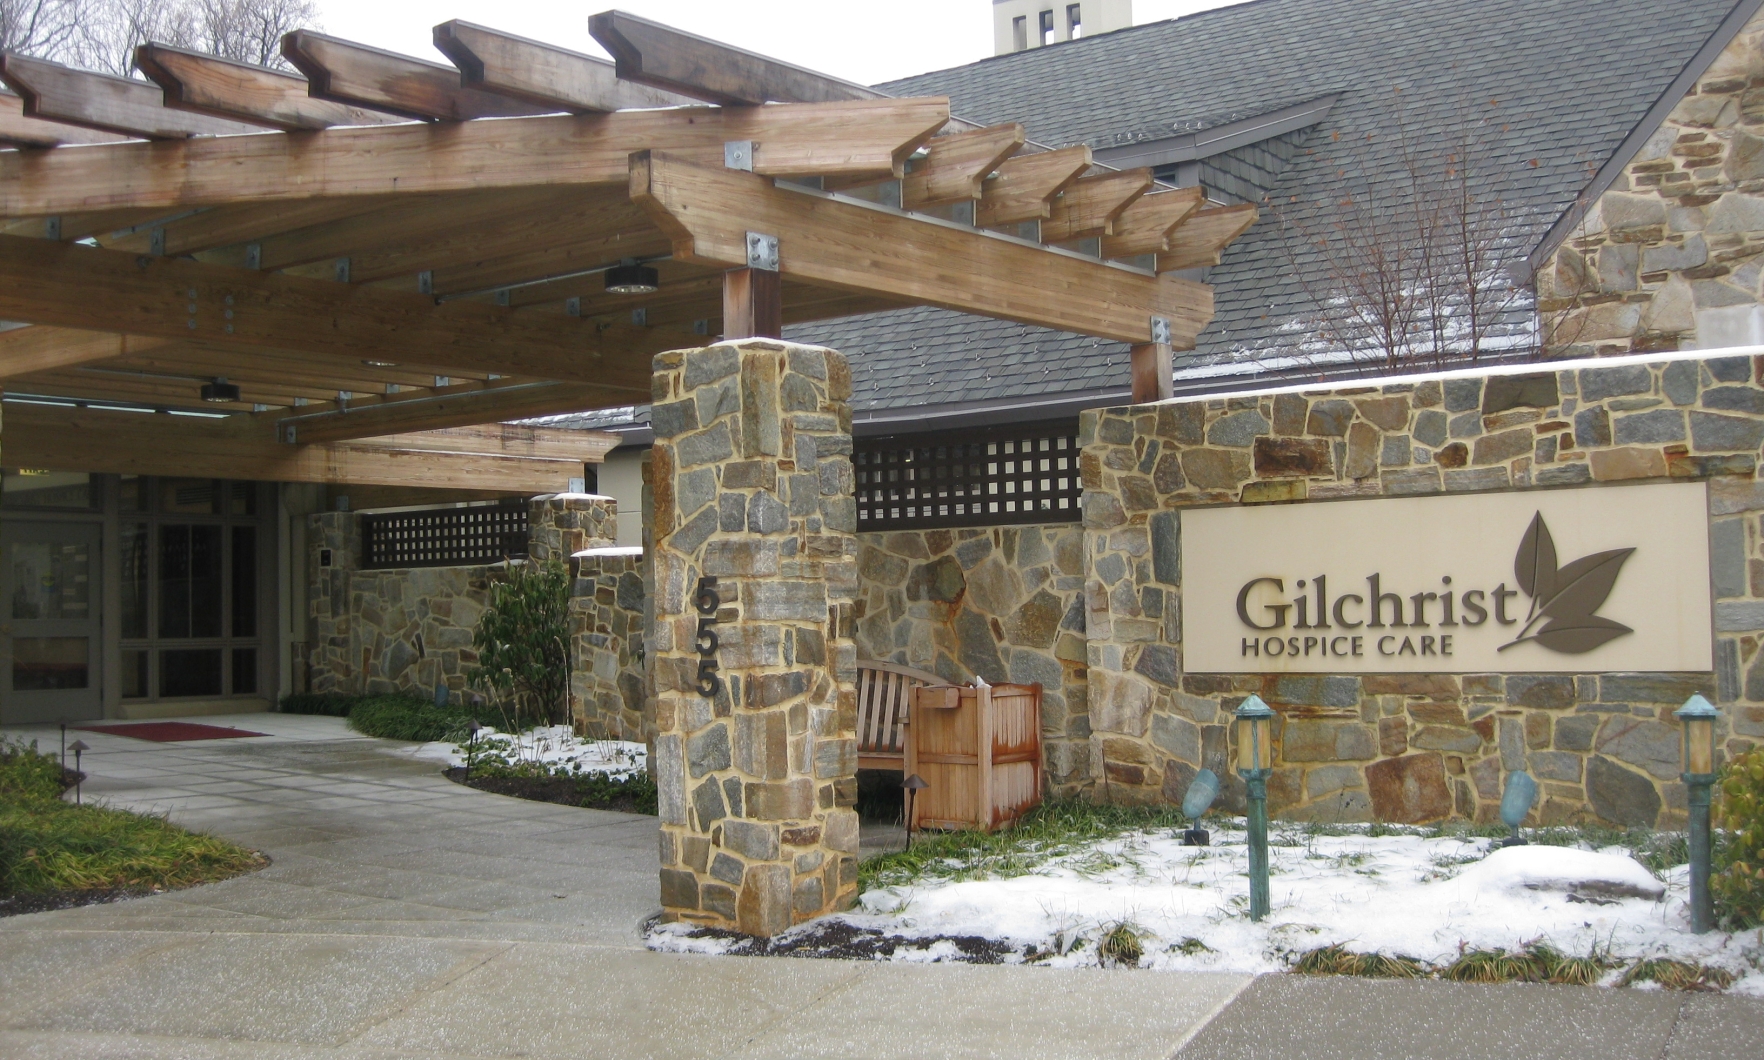 Gilchrist Hospice Care - Front of building